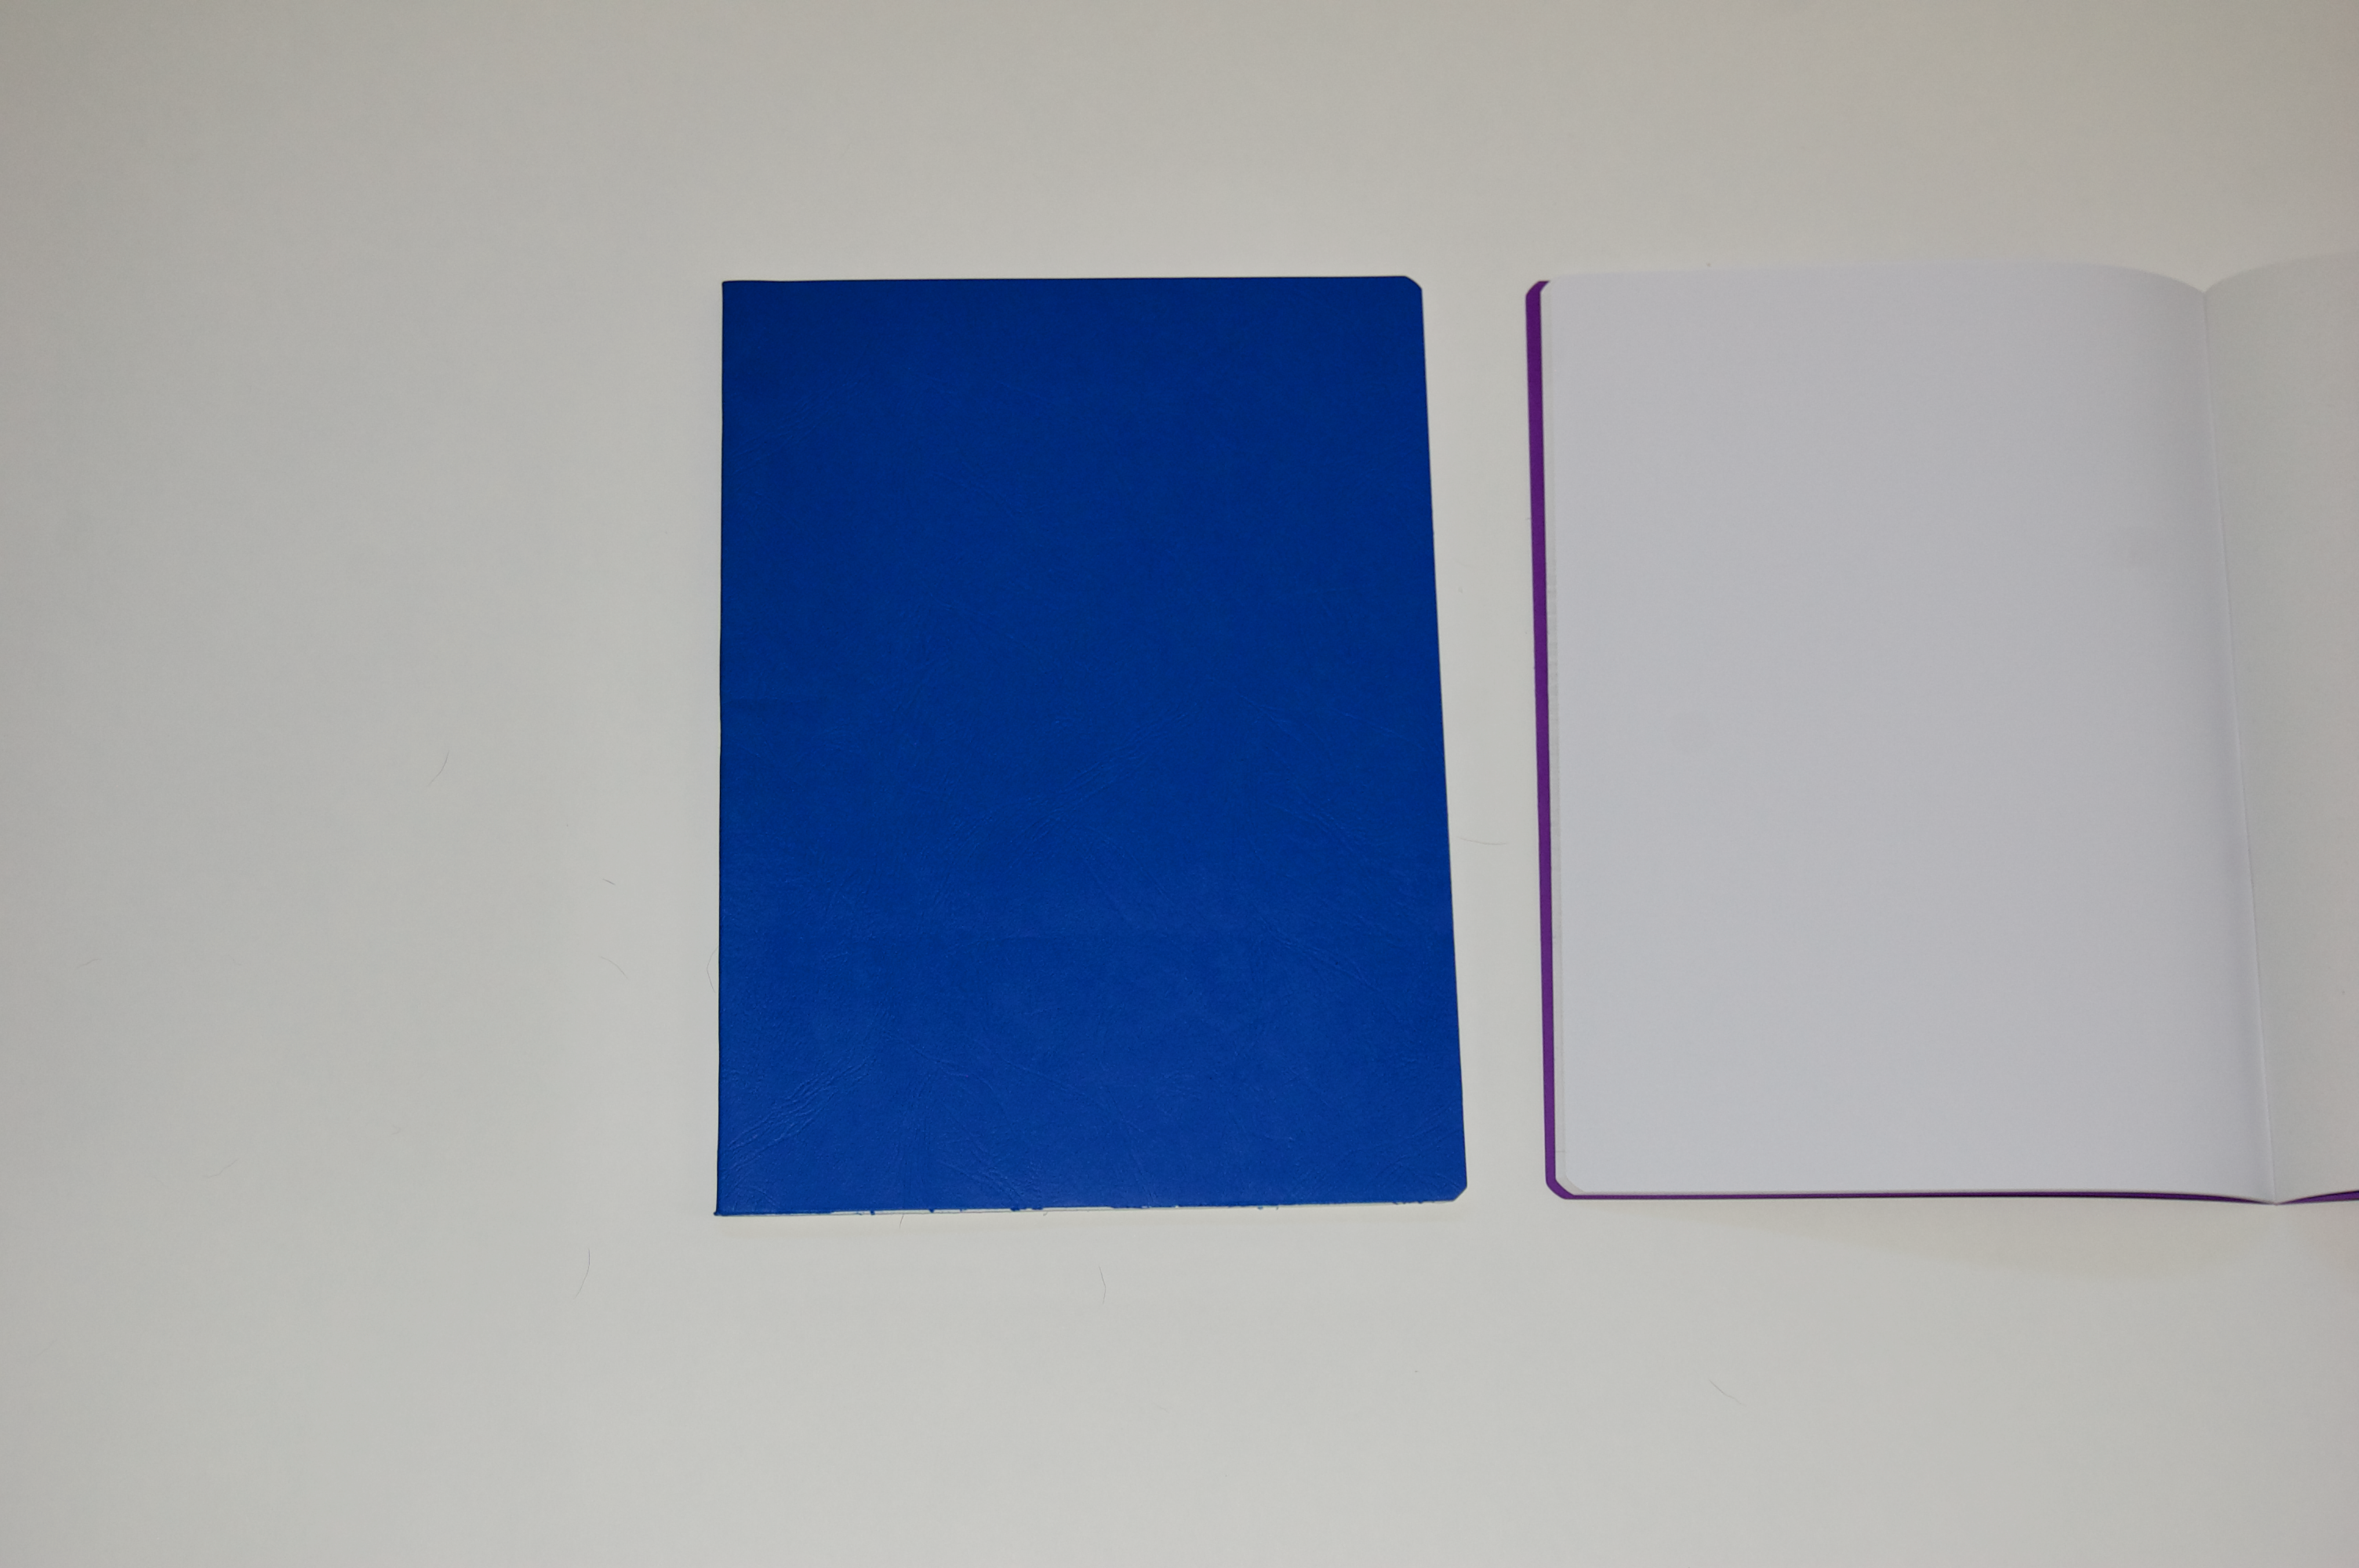 Main Lesson Book in Blue with Onion Skin